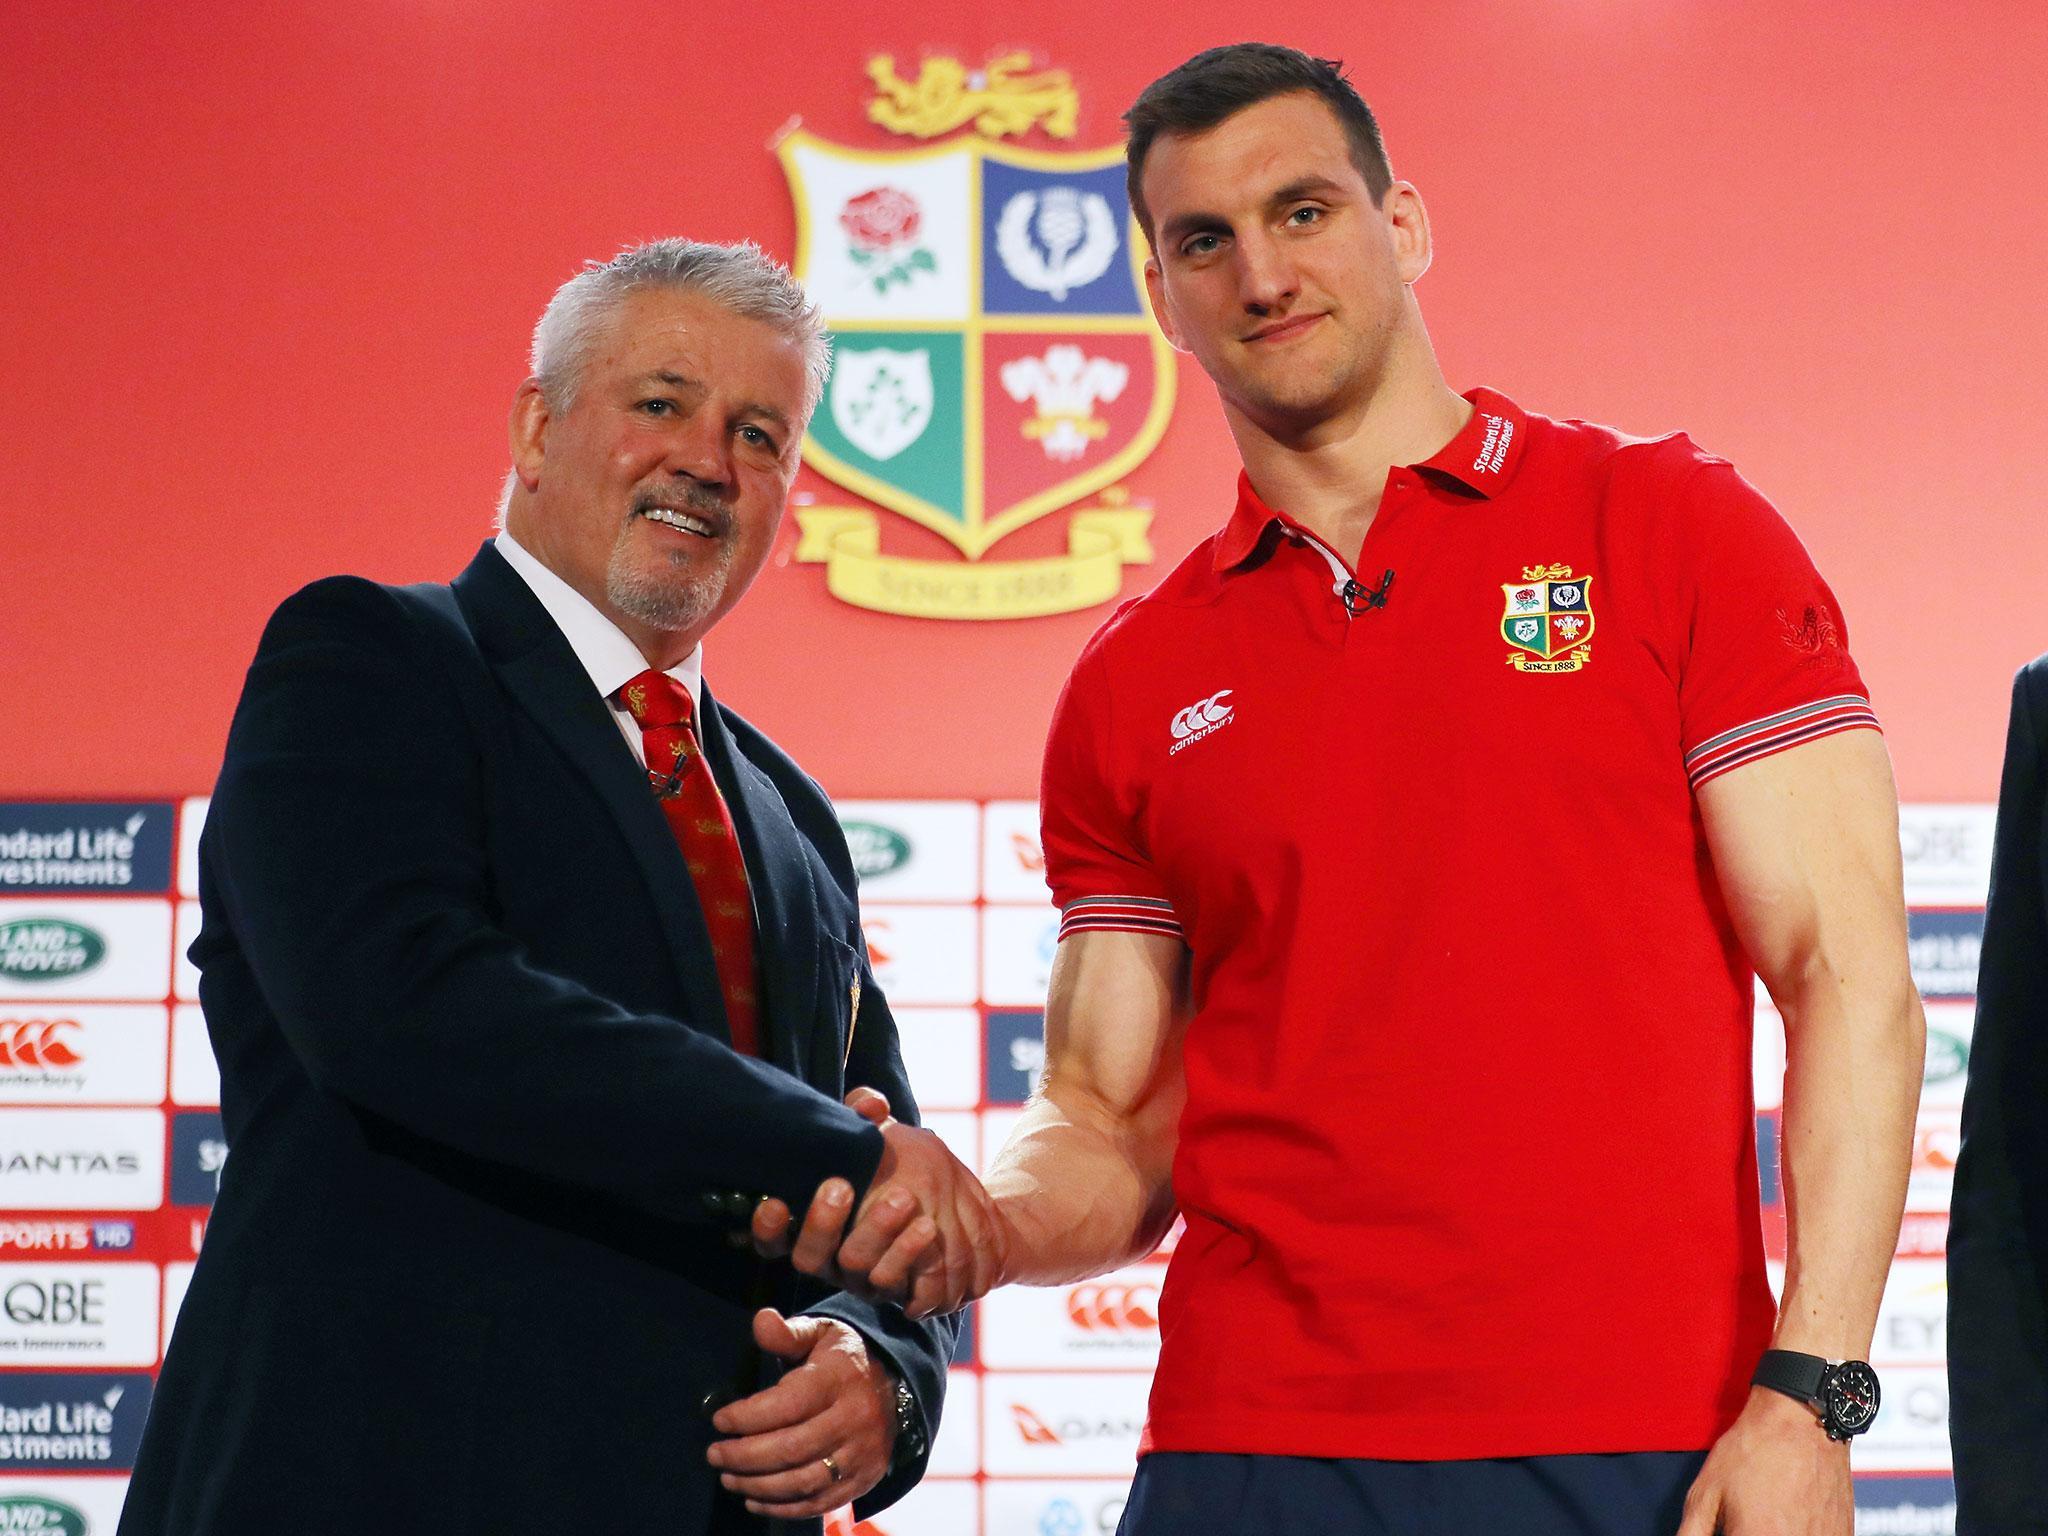 Warren Gatland has revealed his 41-man squad for the tour of New Zealand